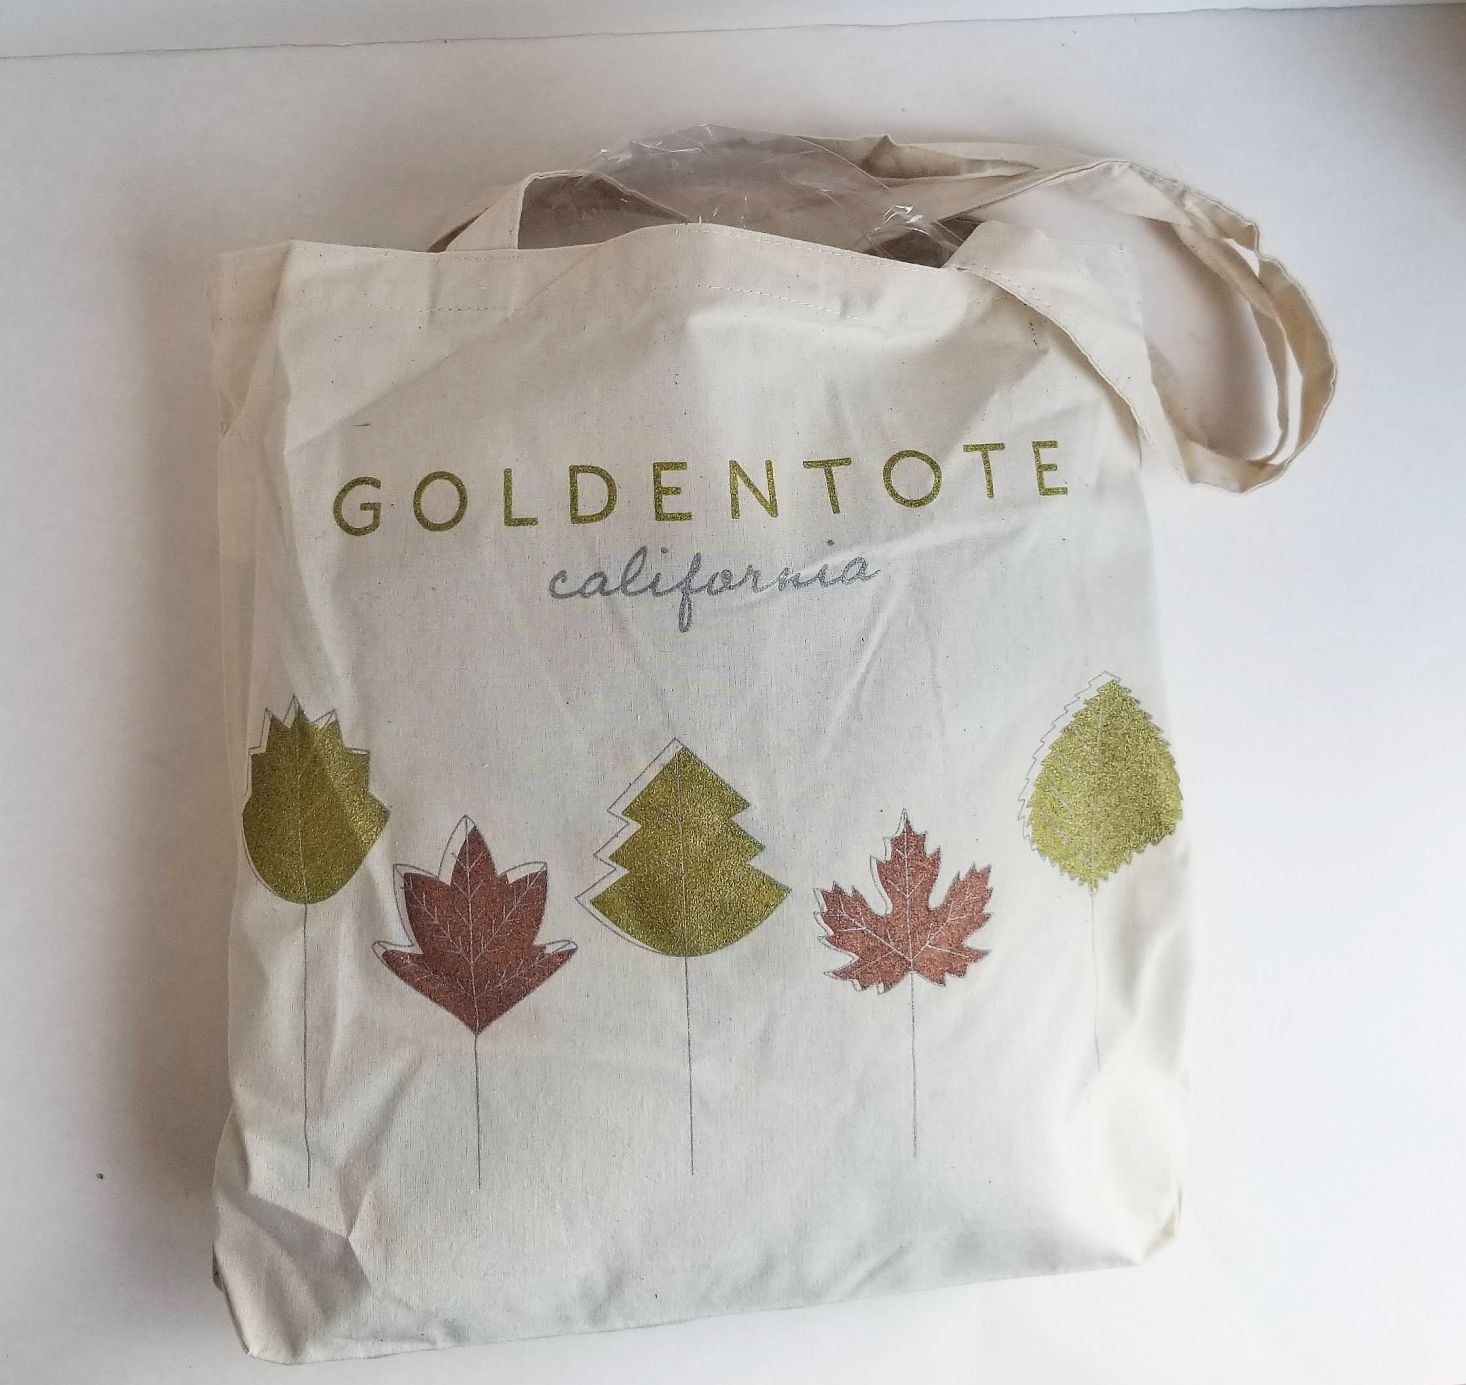 Golden Tote $149 Clothing Review + Add-Ons – October 2018